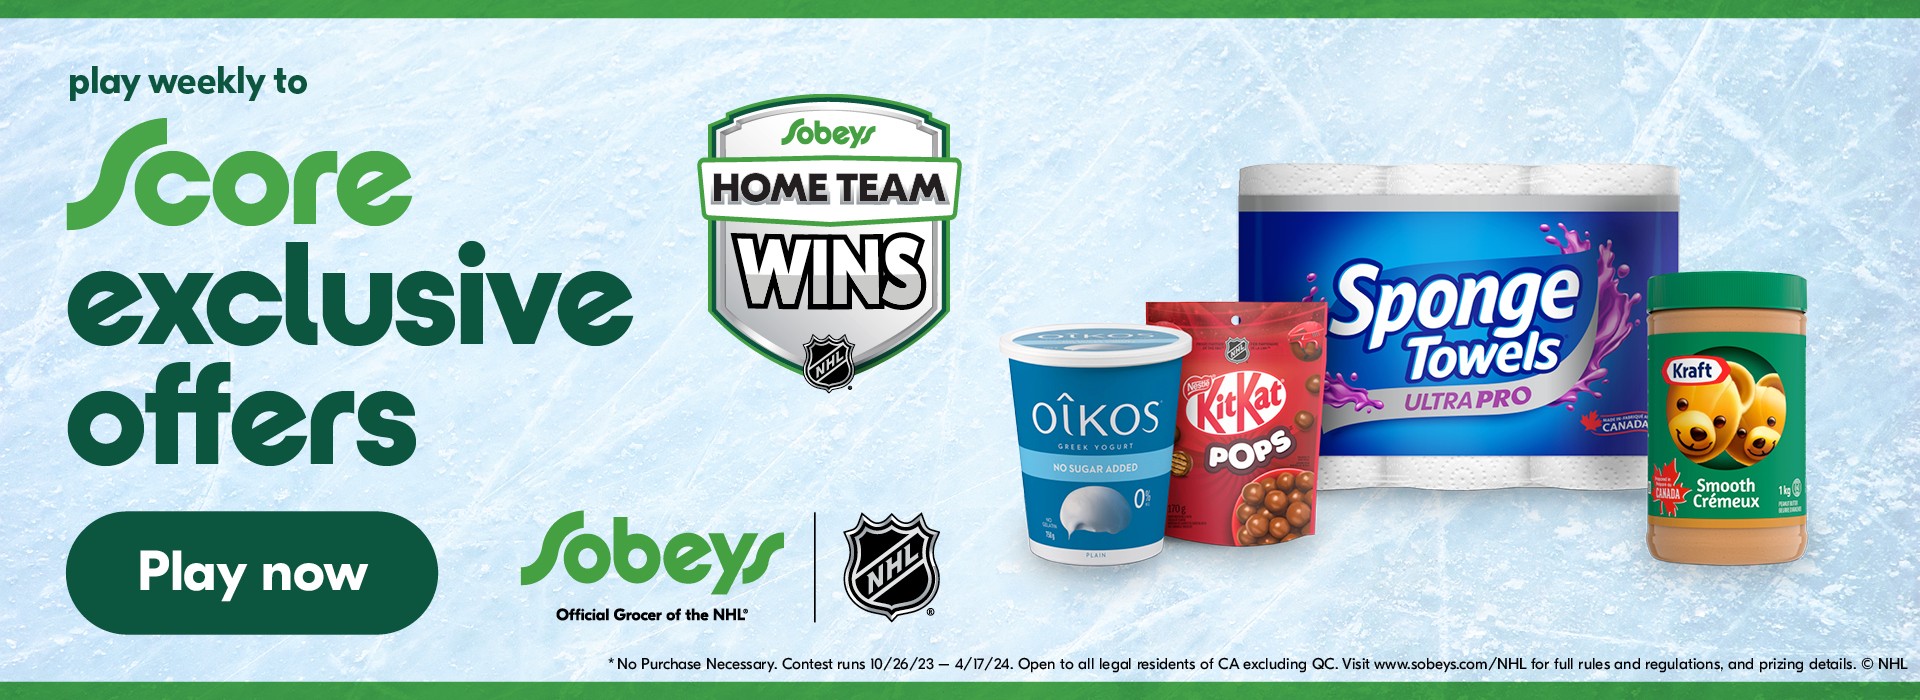 Text reading "Play weekly to score exclusive offers" along with the 'Play Now' button at the bottom and on the right side picture of some grocery products. And the 'Sobeys Home Team wins - NHL' logo is in the center.